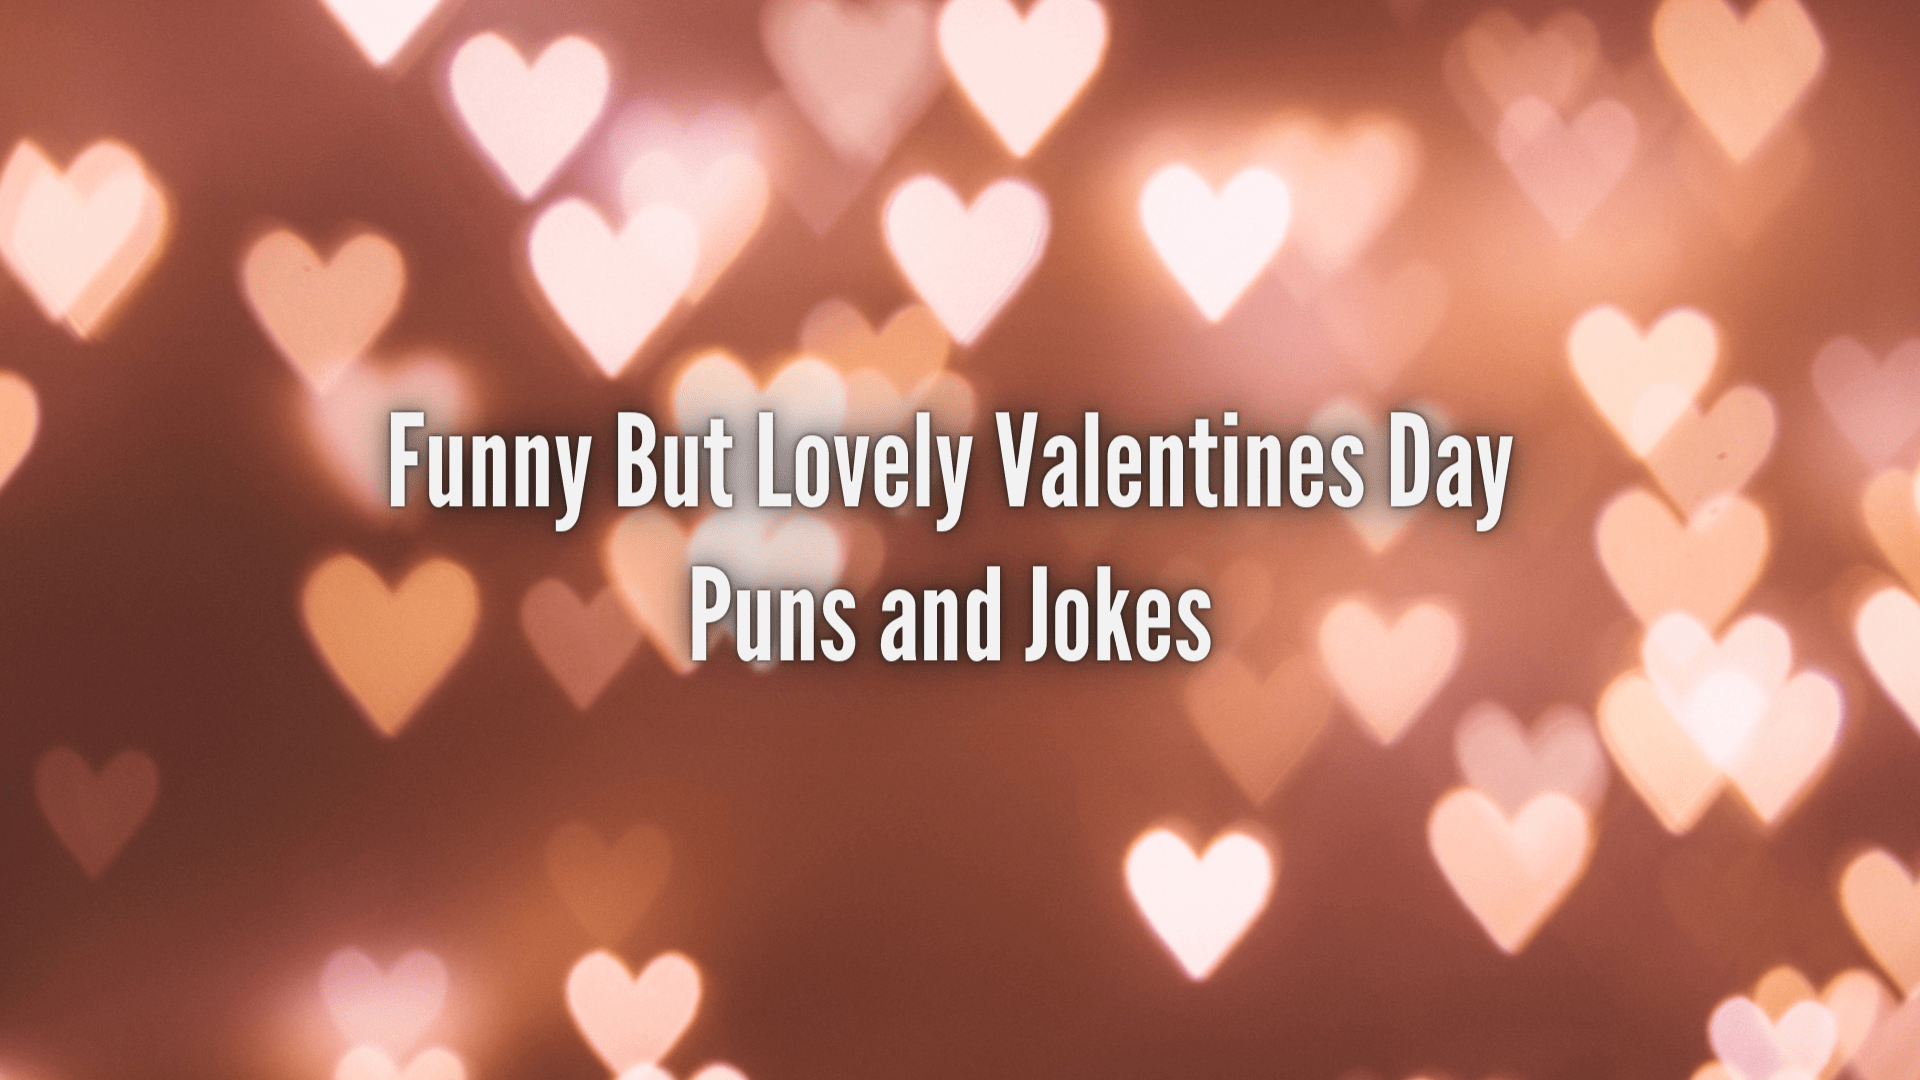 Funny But Lovely Valentines Day Puns and Jokes 2021